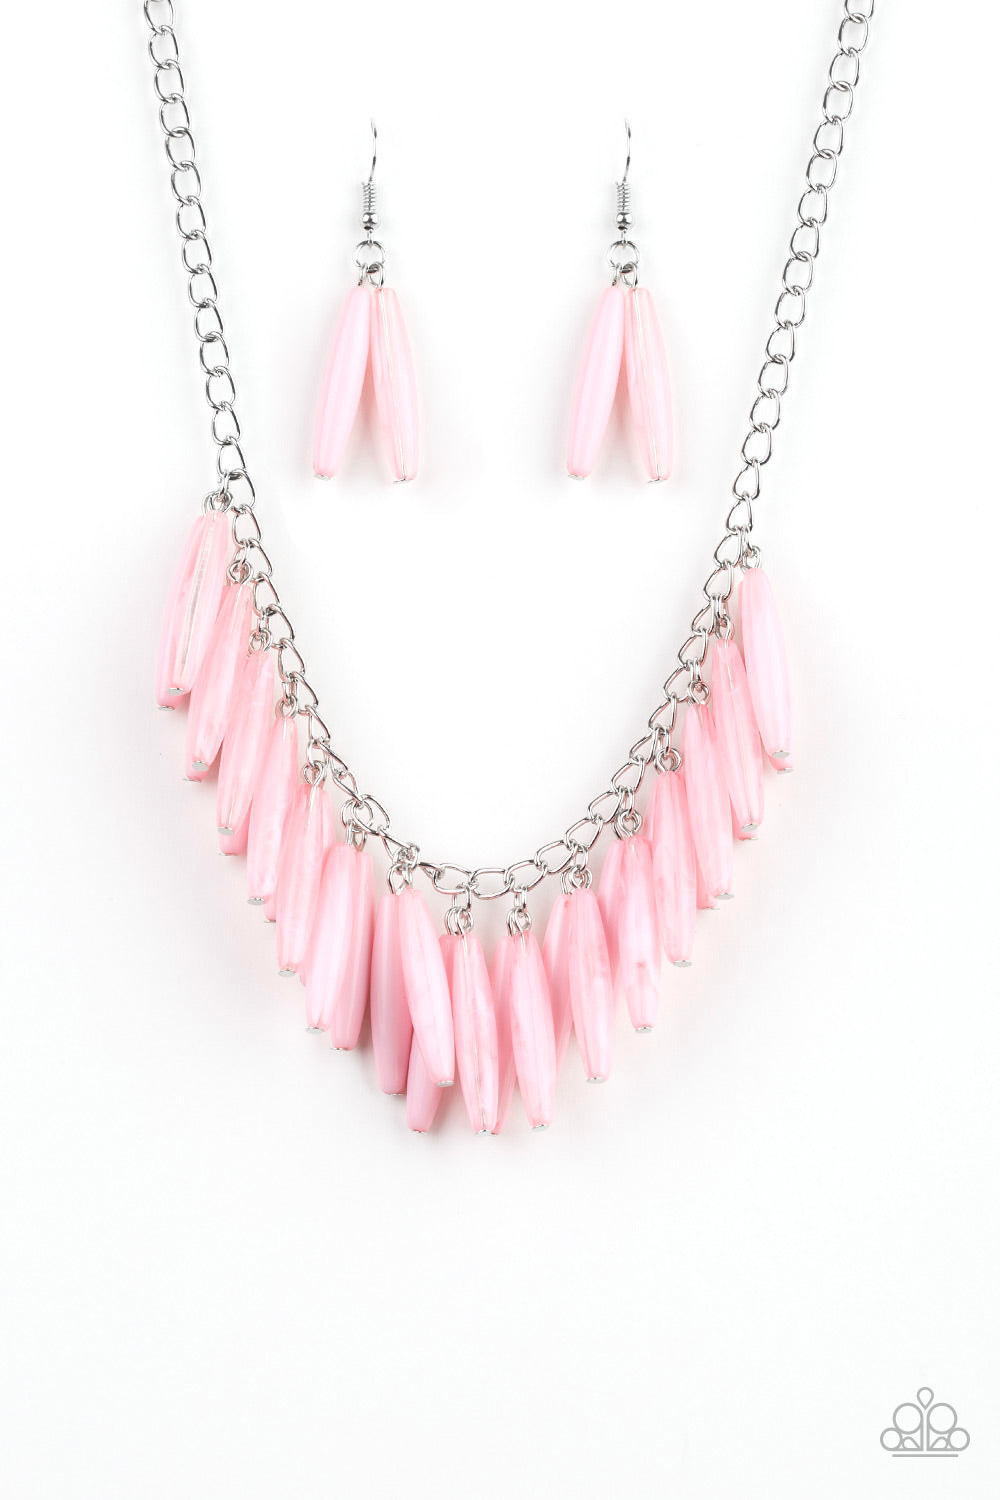 Full Of Flavor Pink Paparazzi Necklaces Cashmere Pink Jewels - Cashmere Pink Jewels & Accessories, Cashmere Pink Jewels & Accessories - Paparazzi